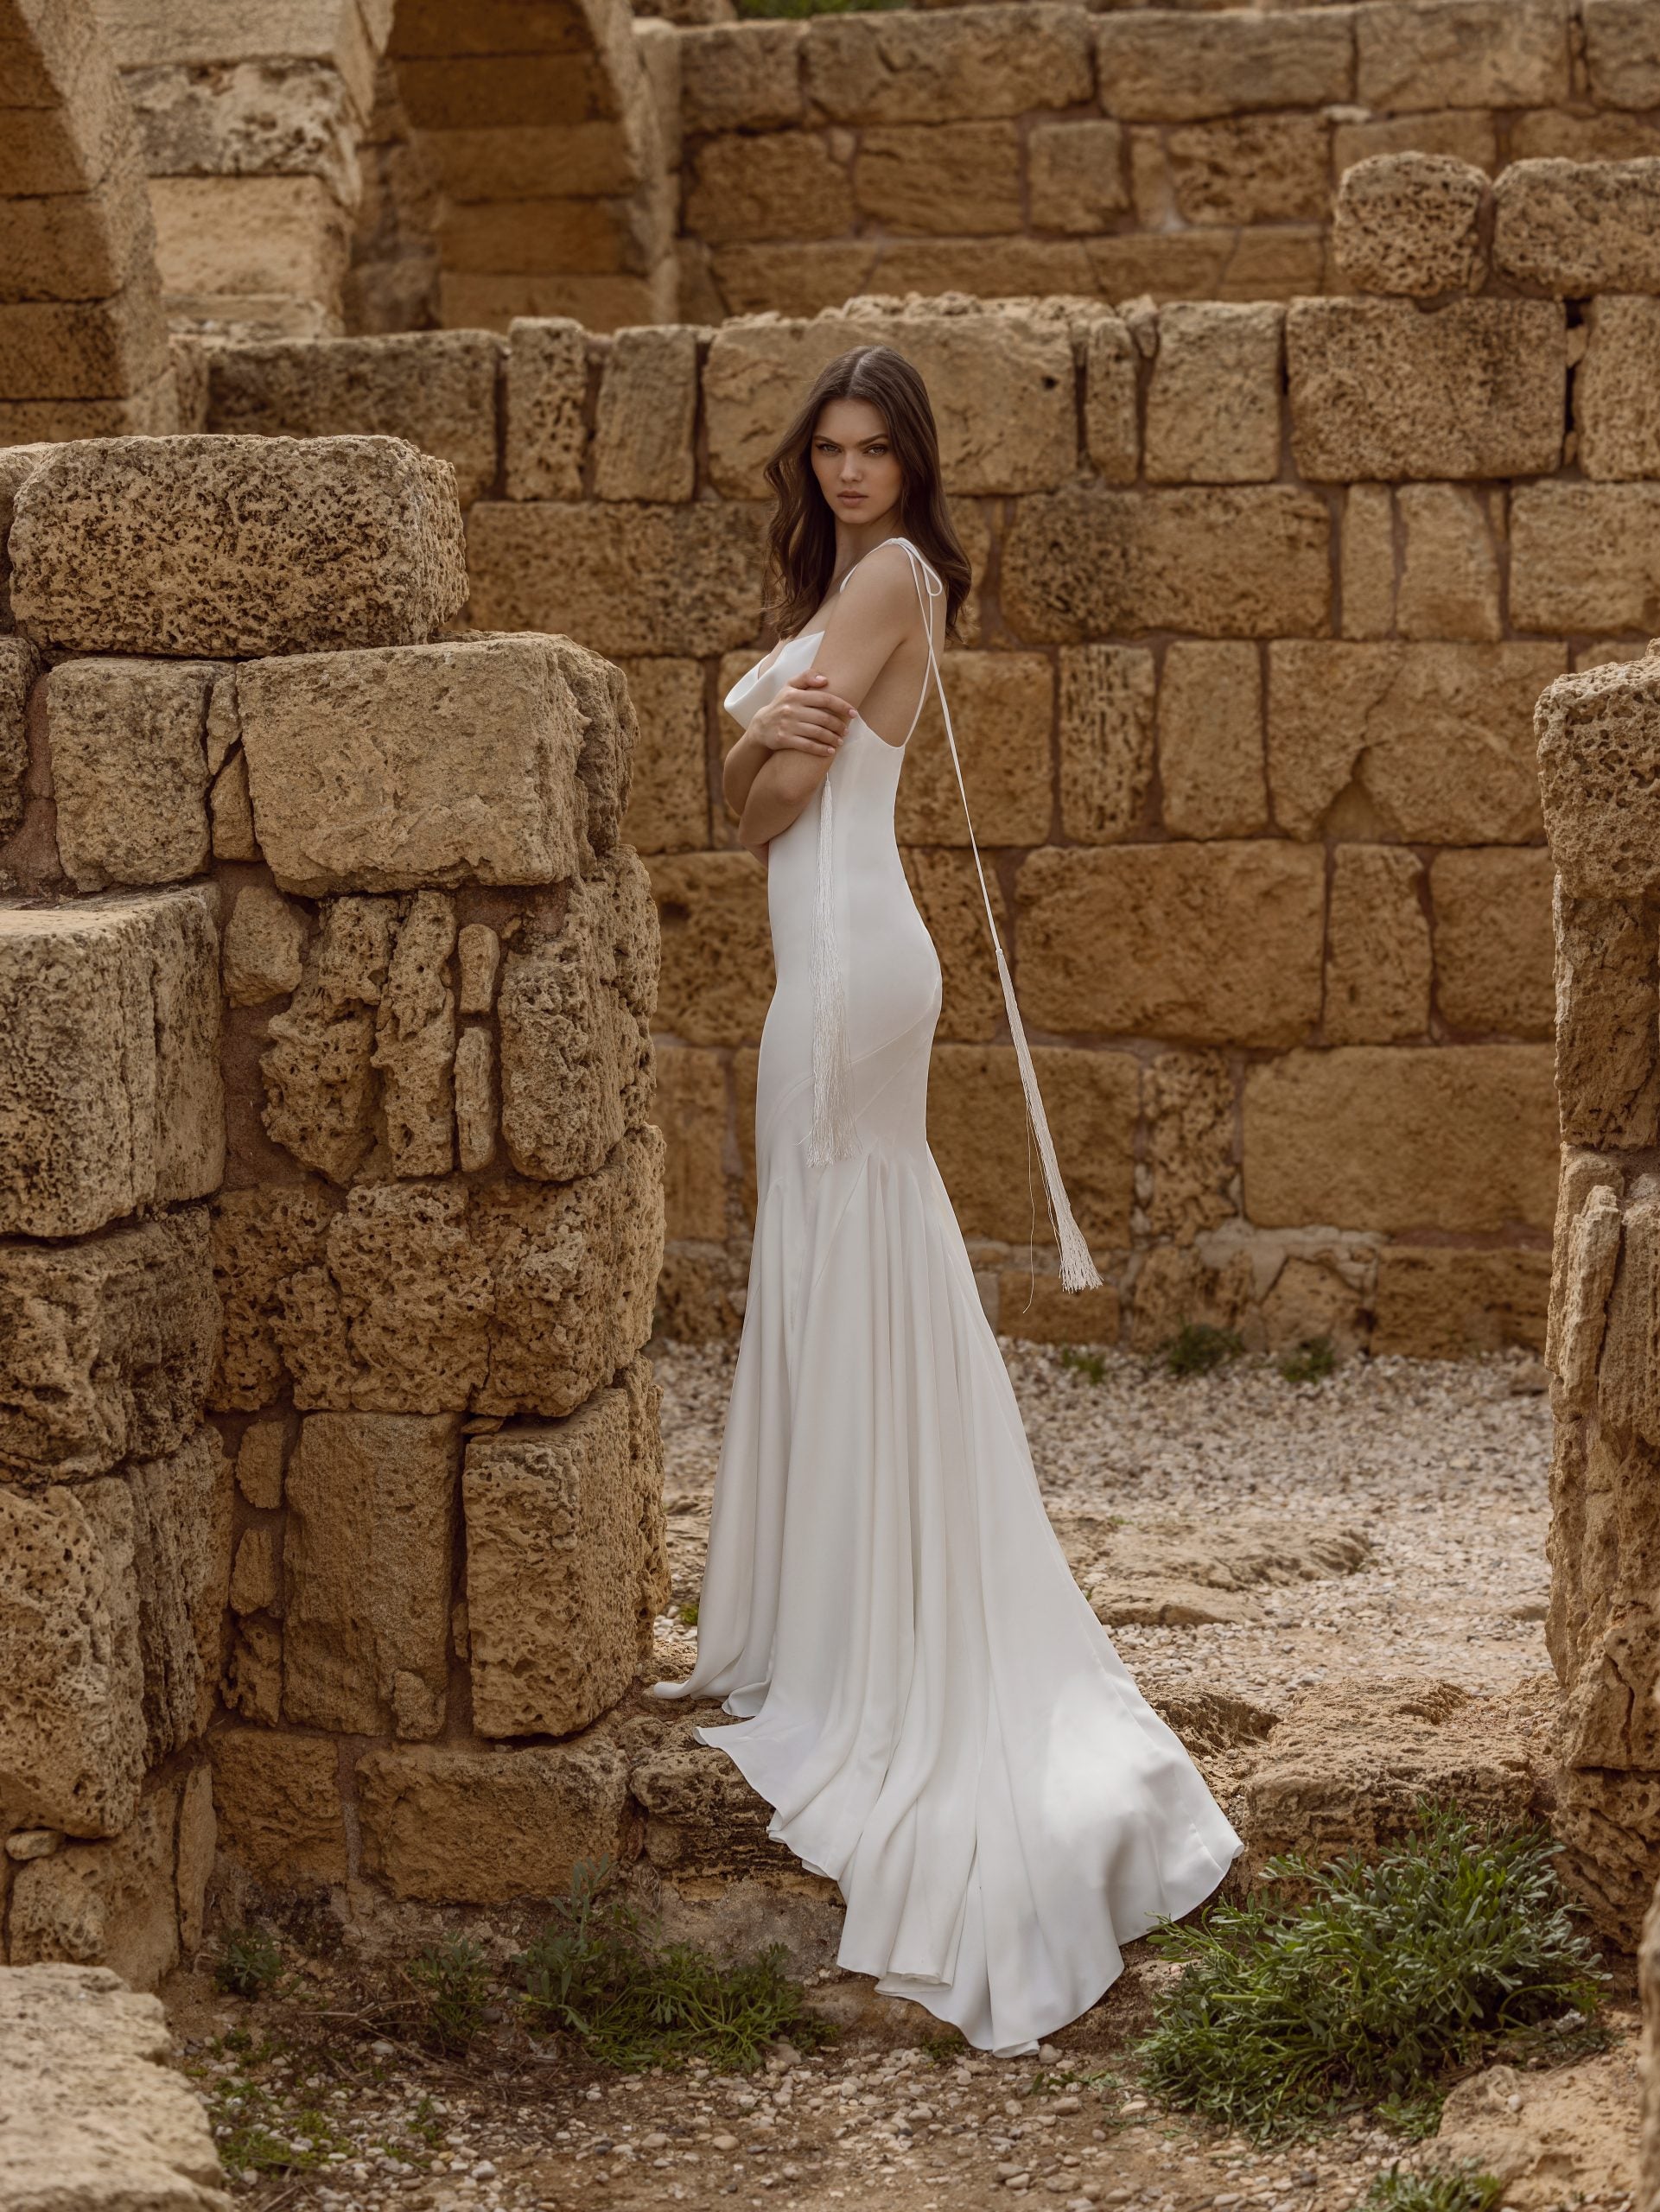 Spaghetti Strap Fit And Flare Wedding Dress With Open Back by Love by Pnina Tornai - Image 2